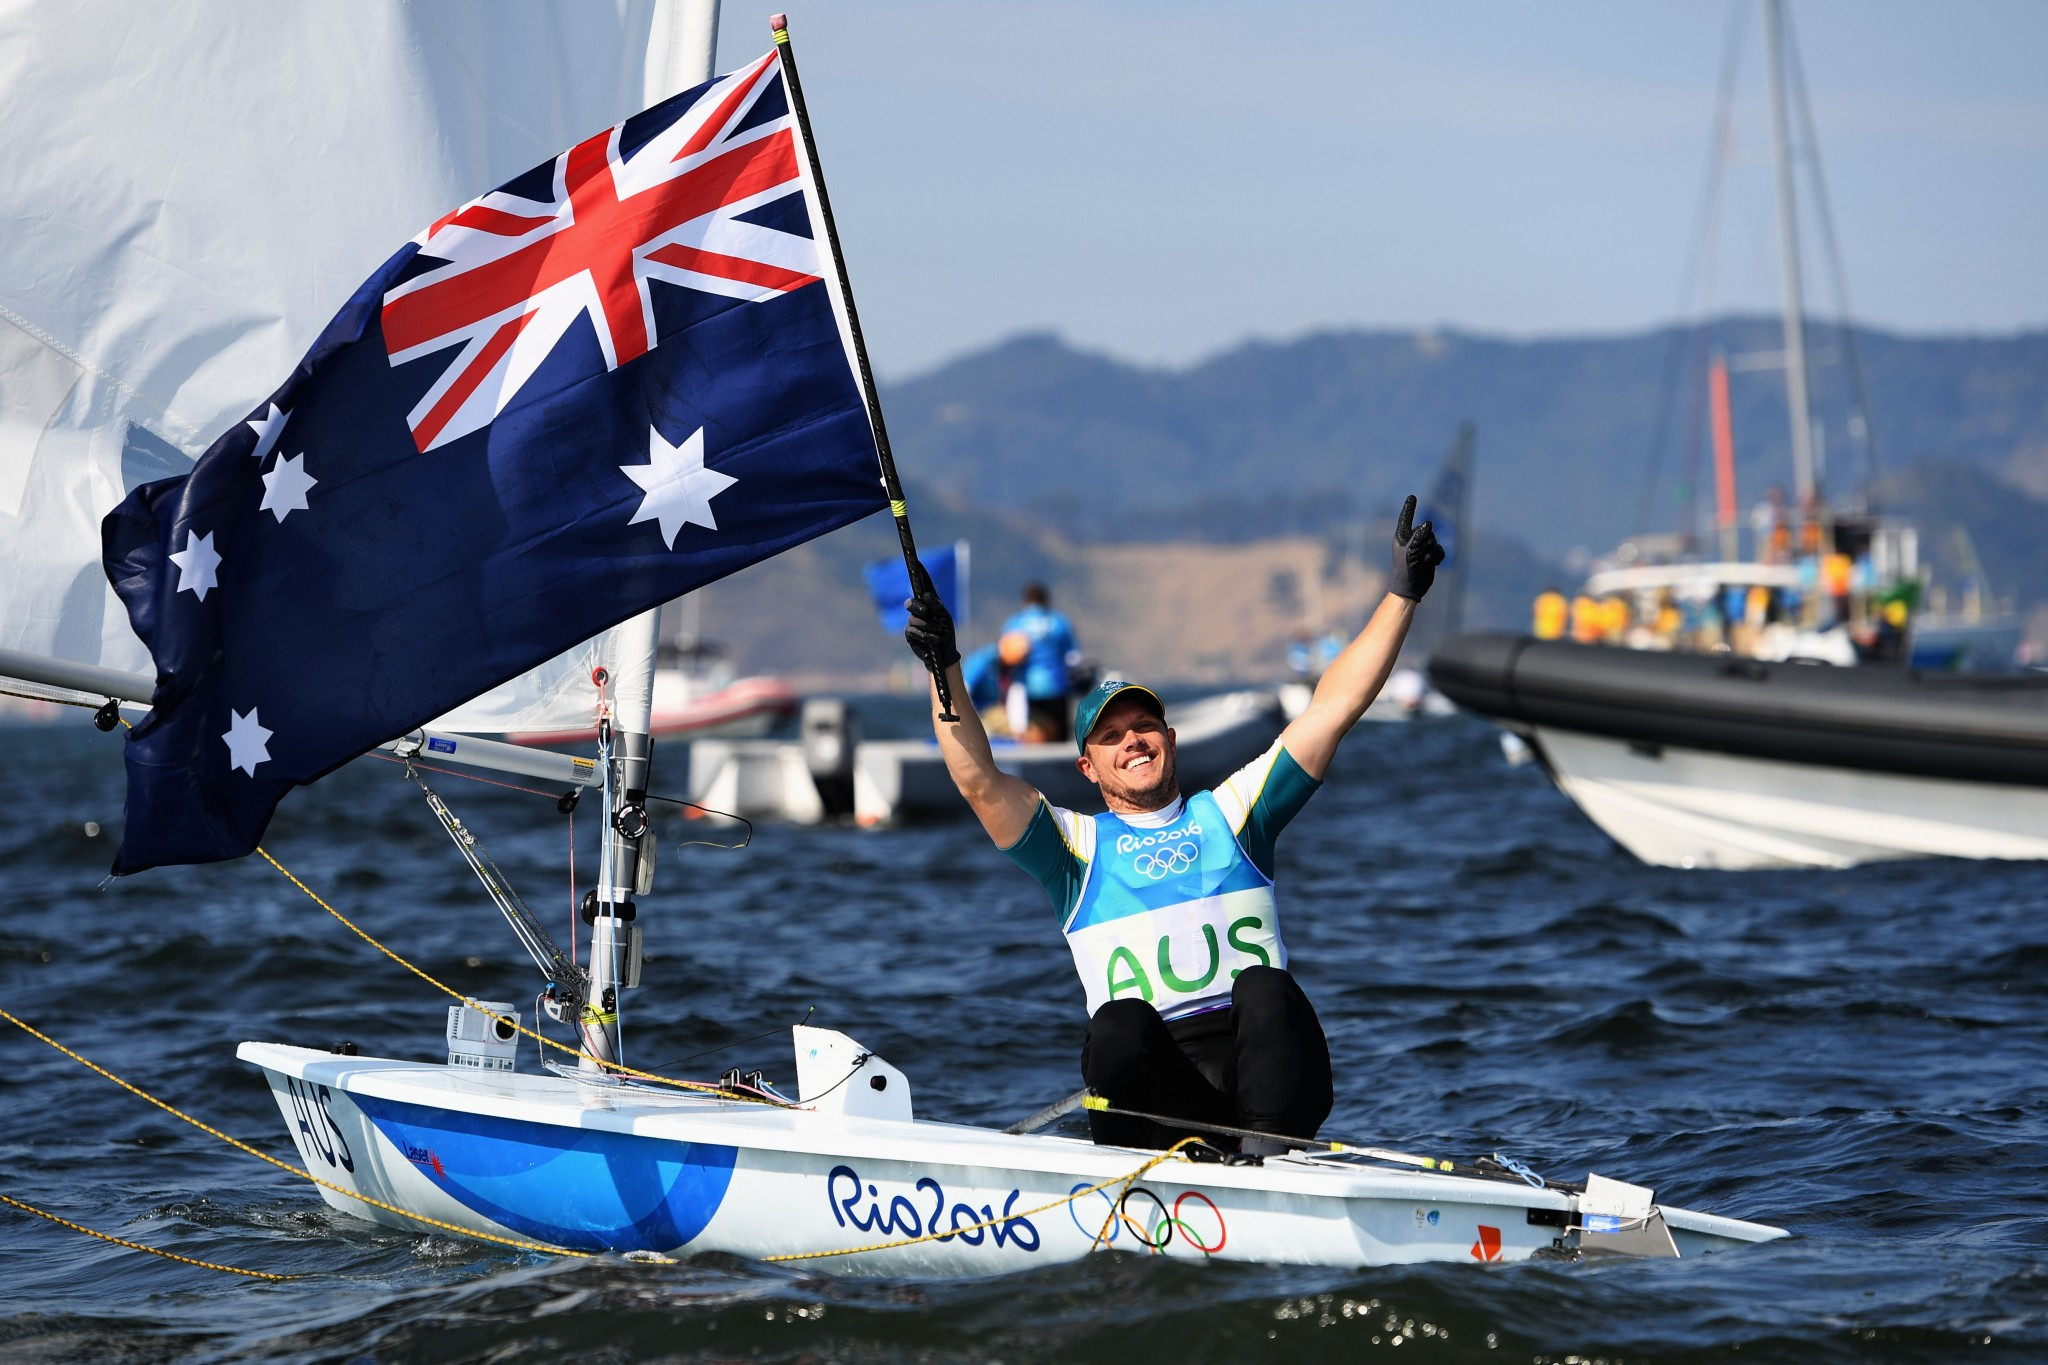 Olympic champions start well at 2018 World Sailing Championships test event in Aarhus